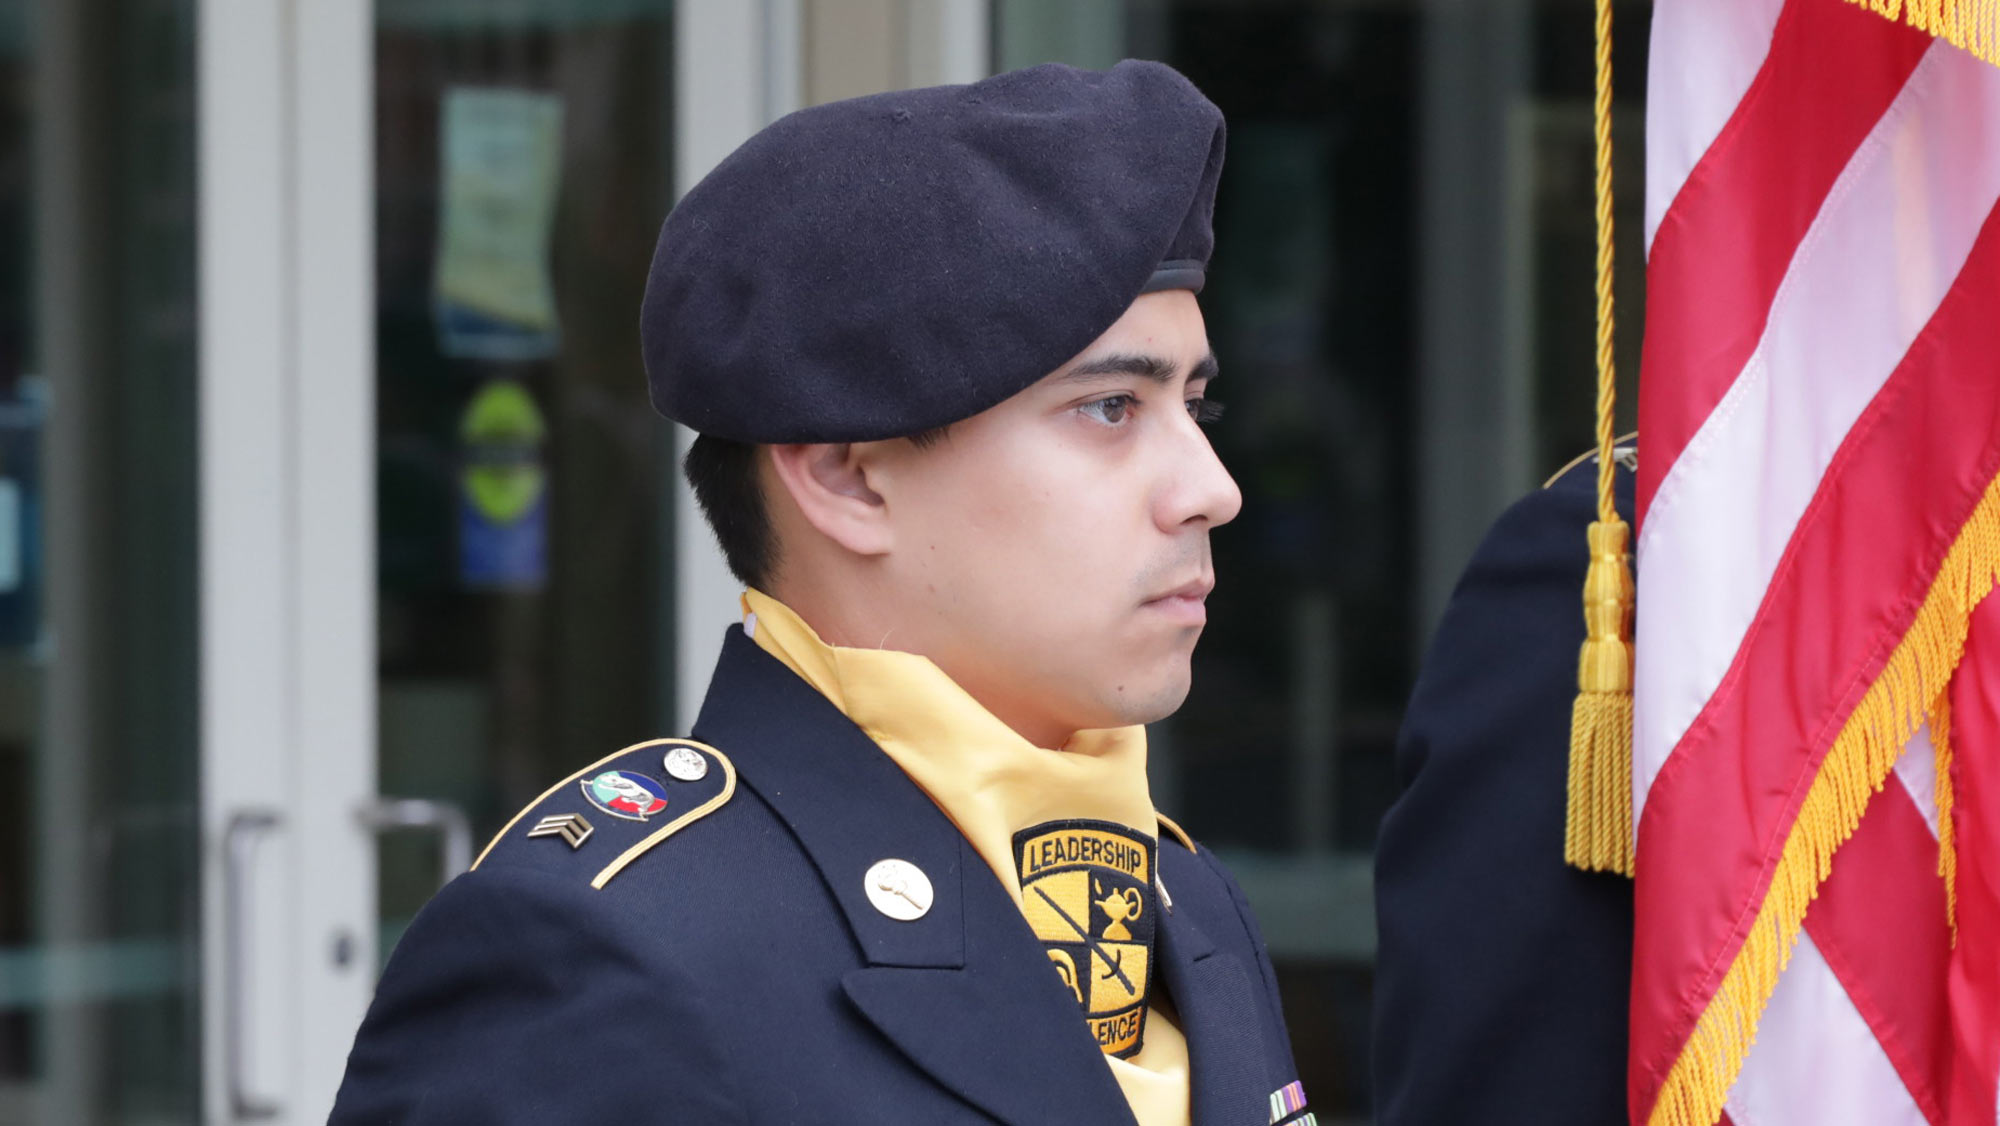 Army ROTC cadet, as part of color guard, at attention